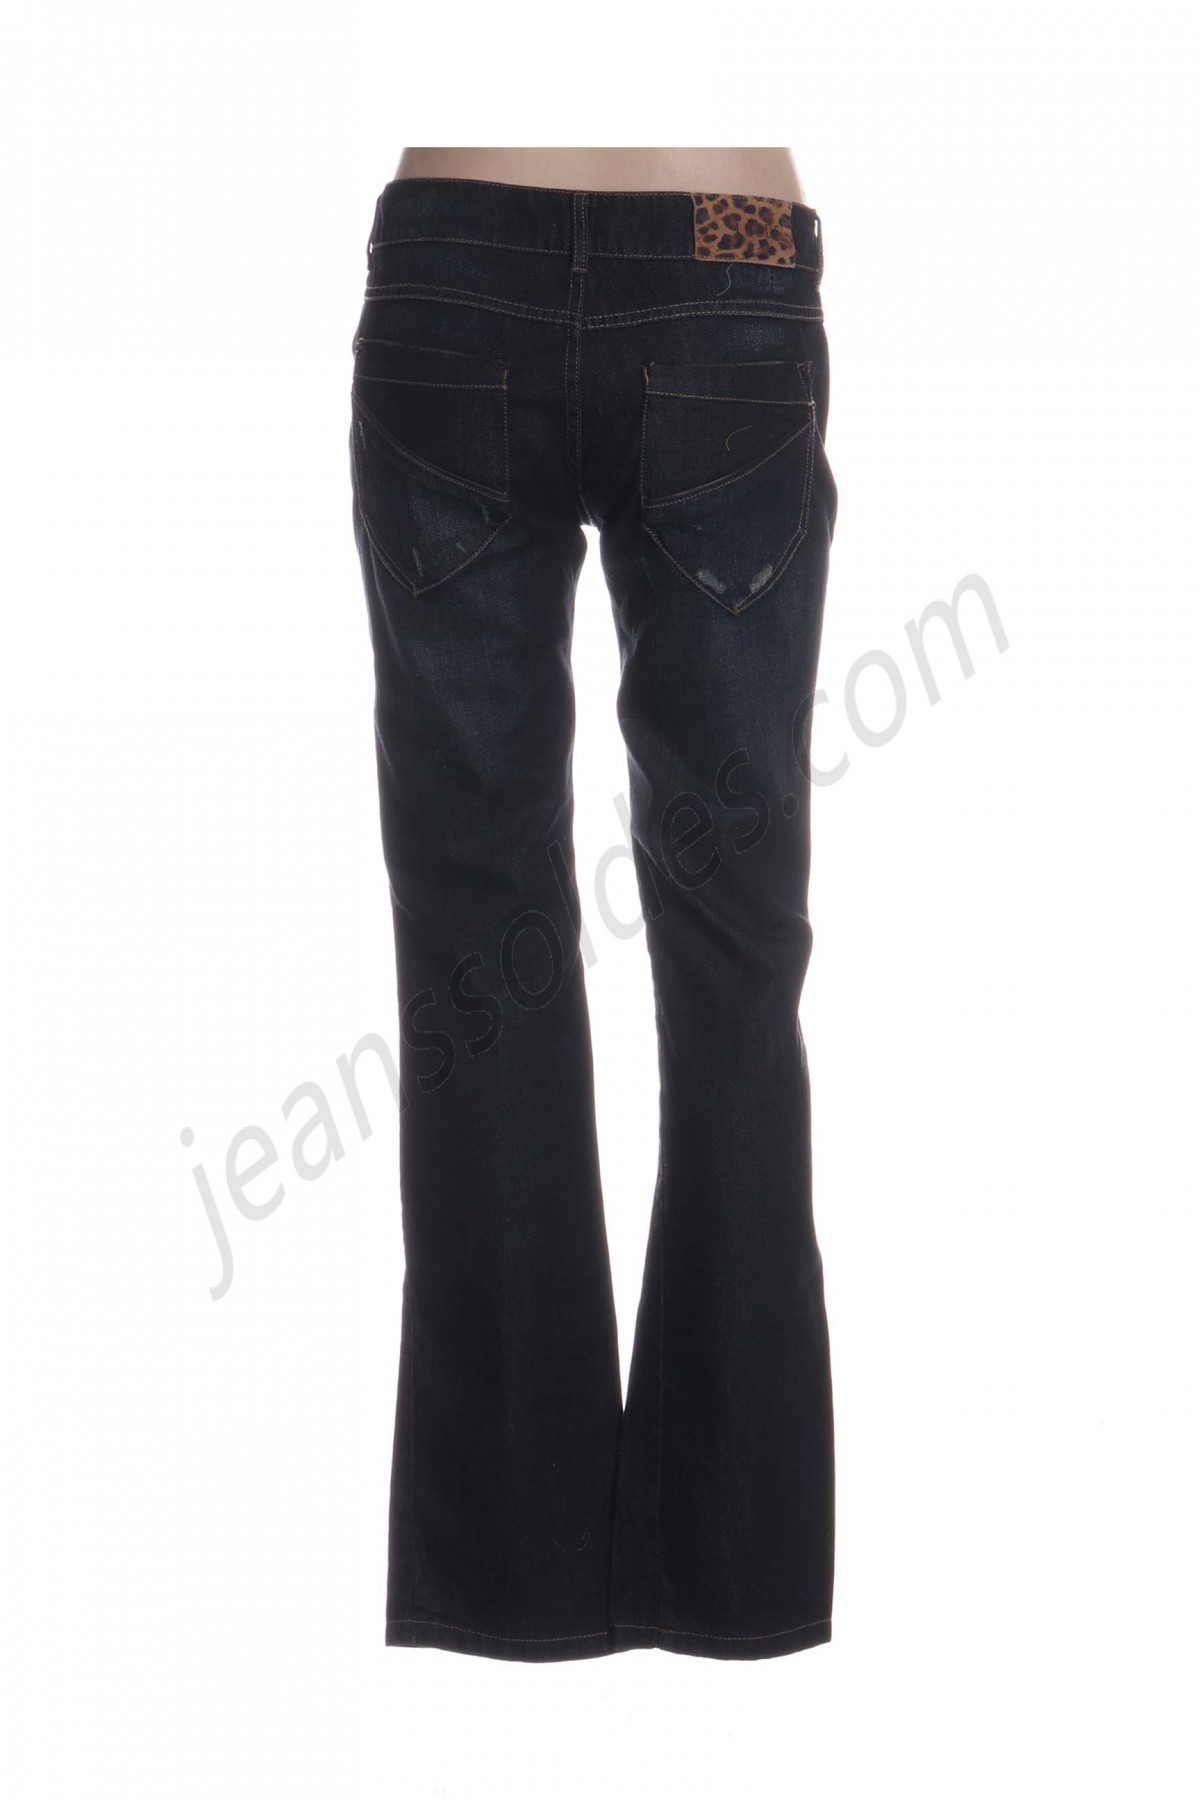 i.code (by ikks)-Jeans coupe slim prix d’amis - -1